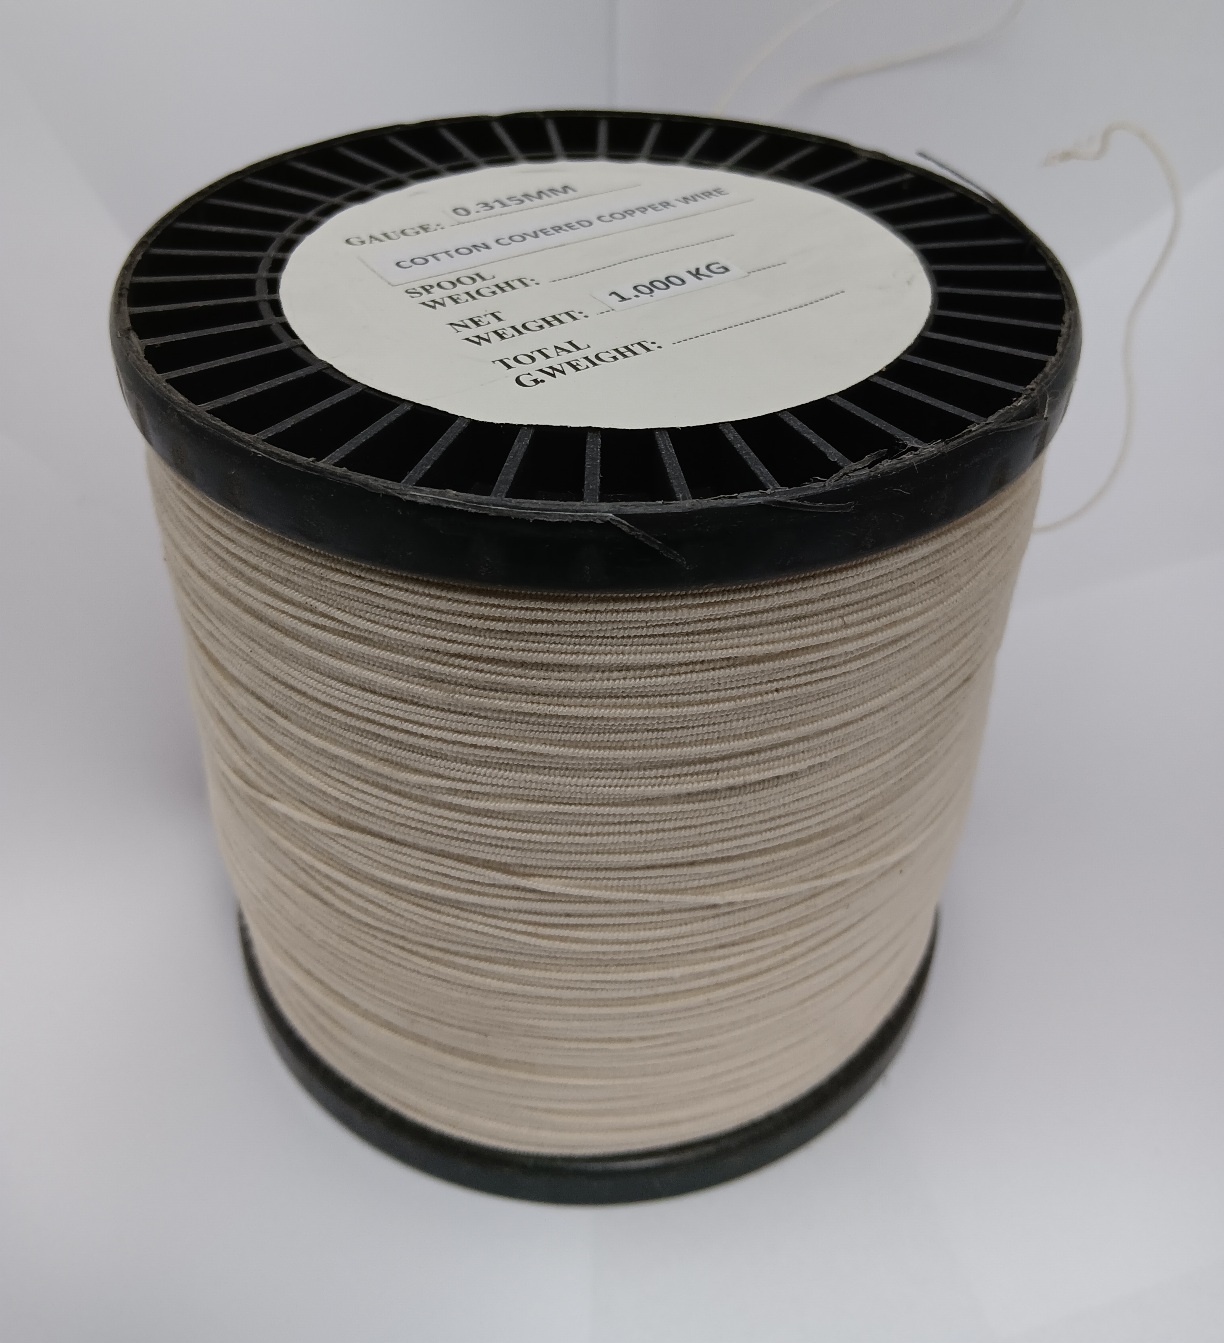 1kg 0.315mm High Build Cotton Covered Copper Craft Wire [0.88mm OD]